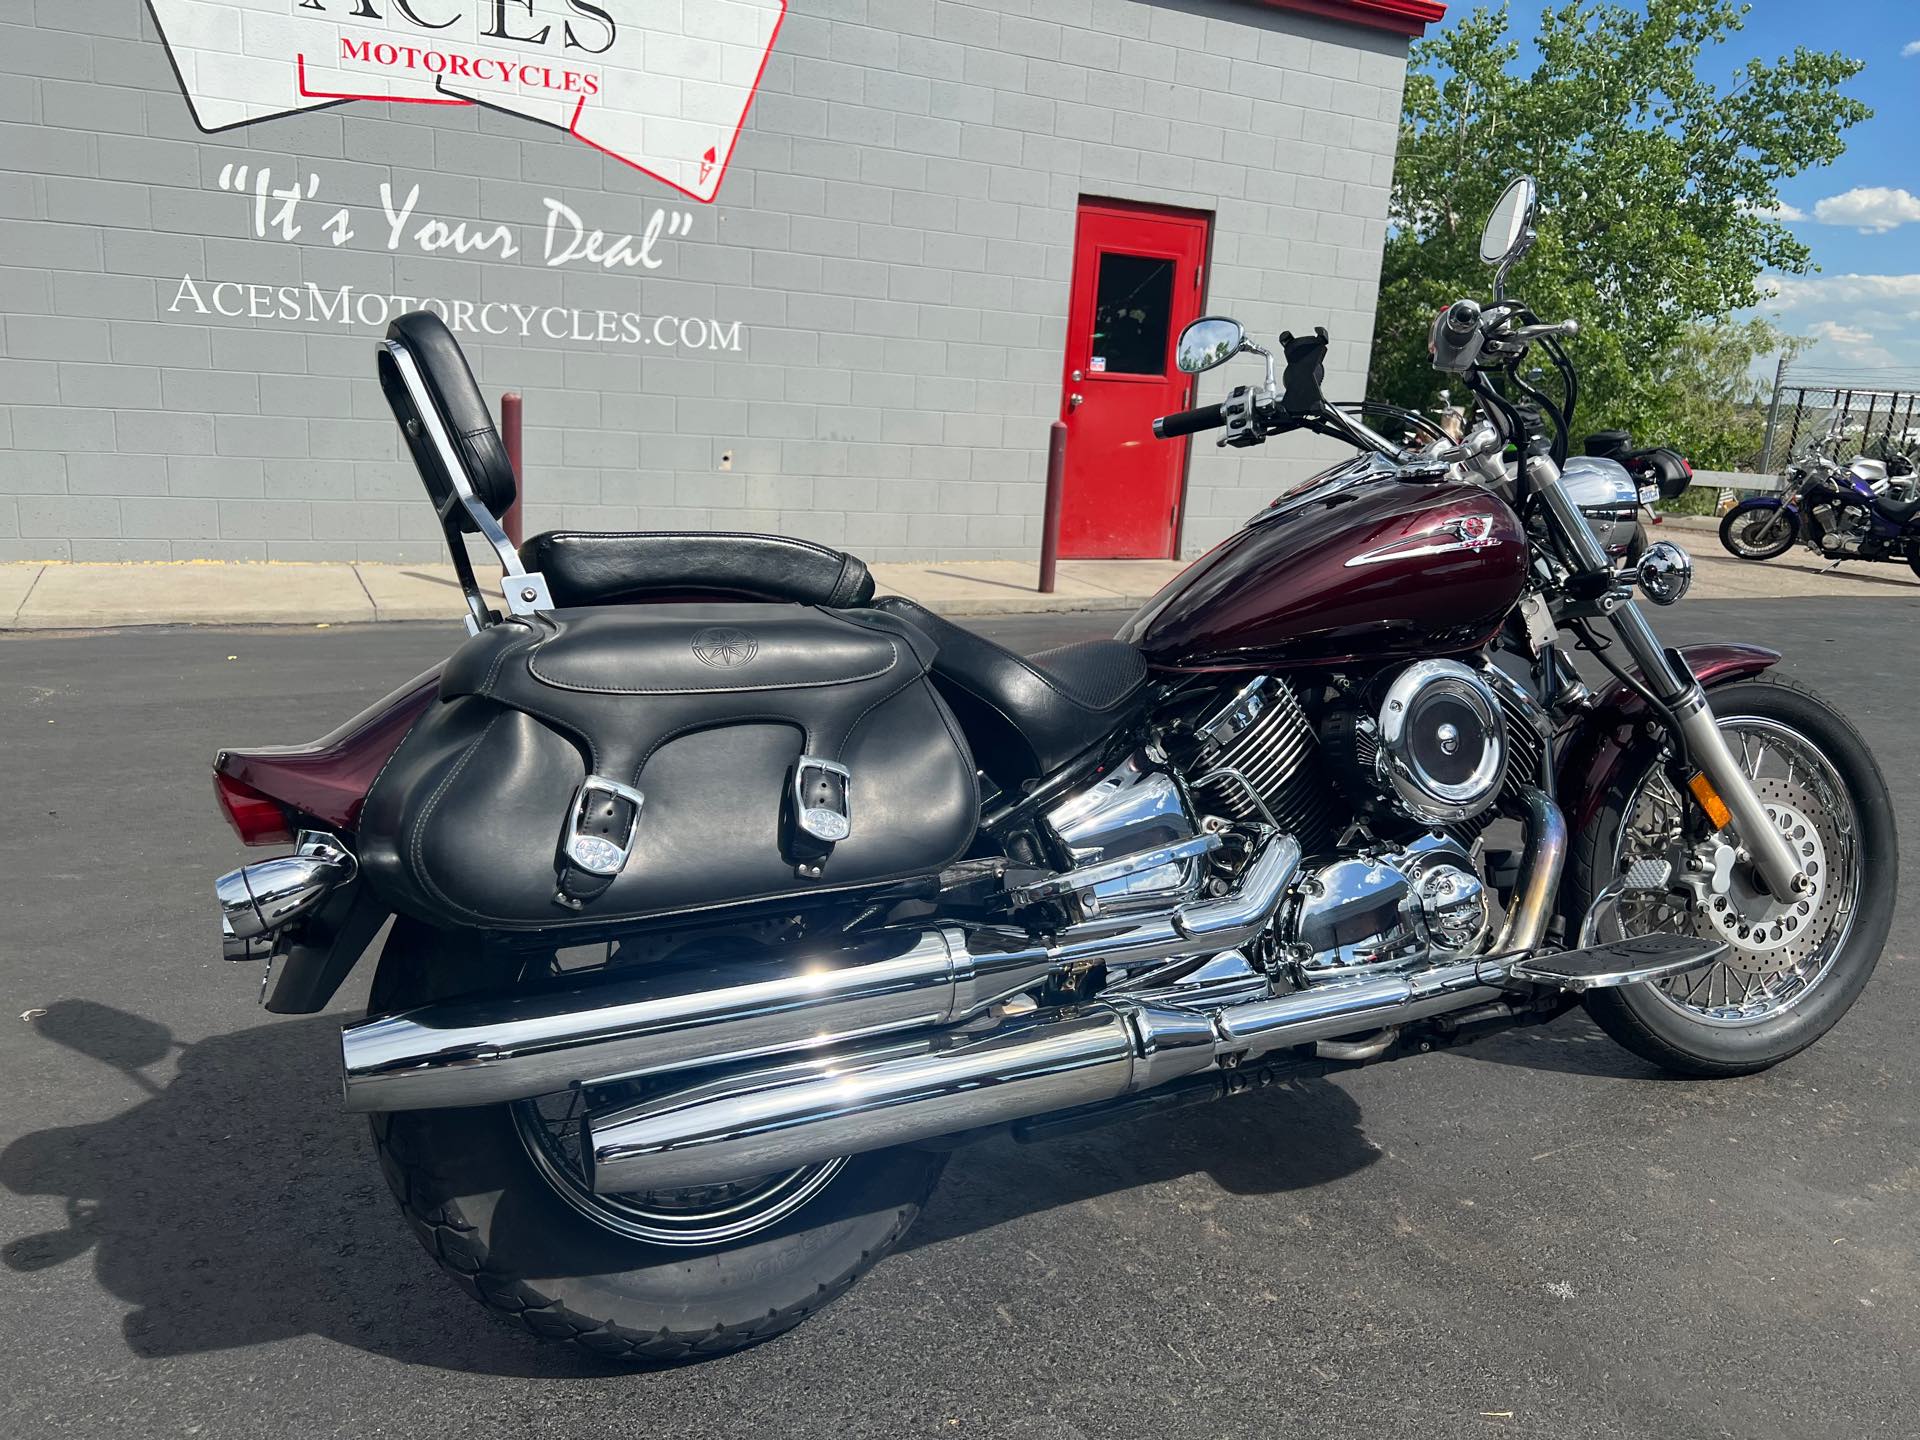 2007 Yamaha V Star 1100 Custom at Aces Motorcycles - Fort Collins